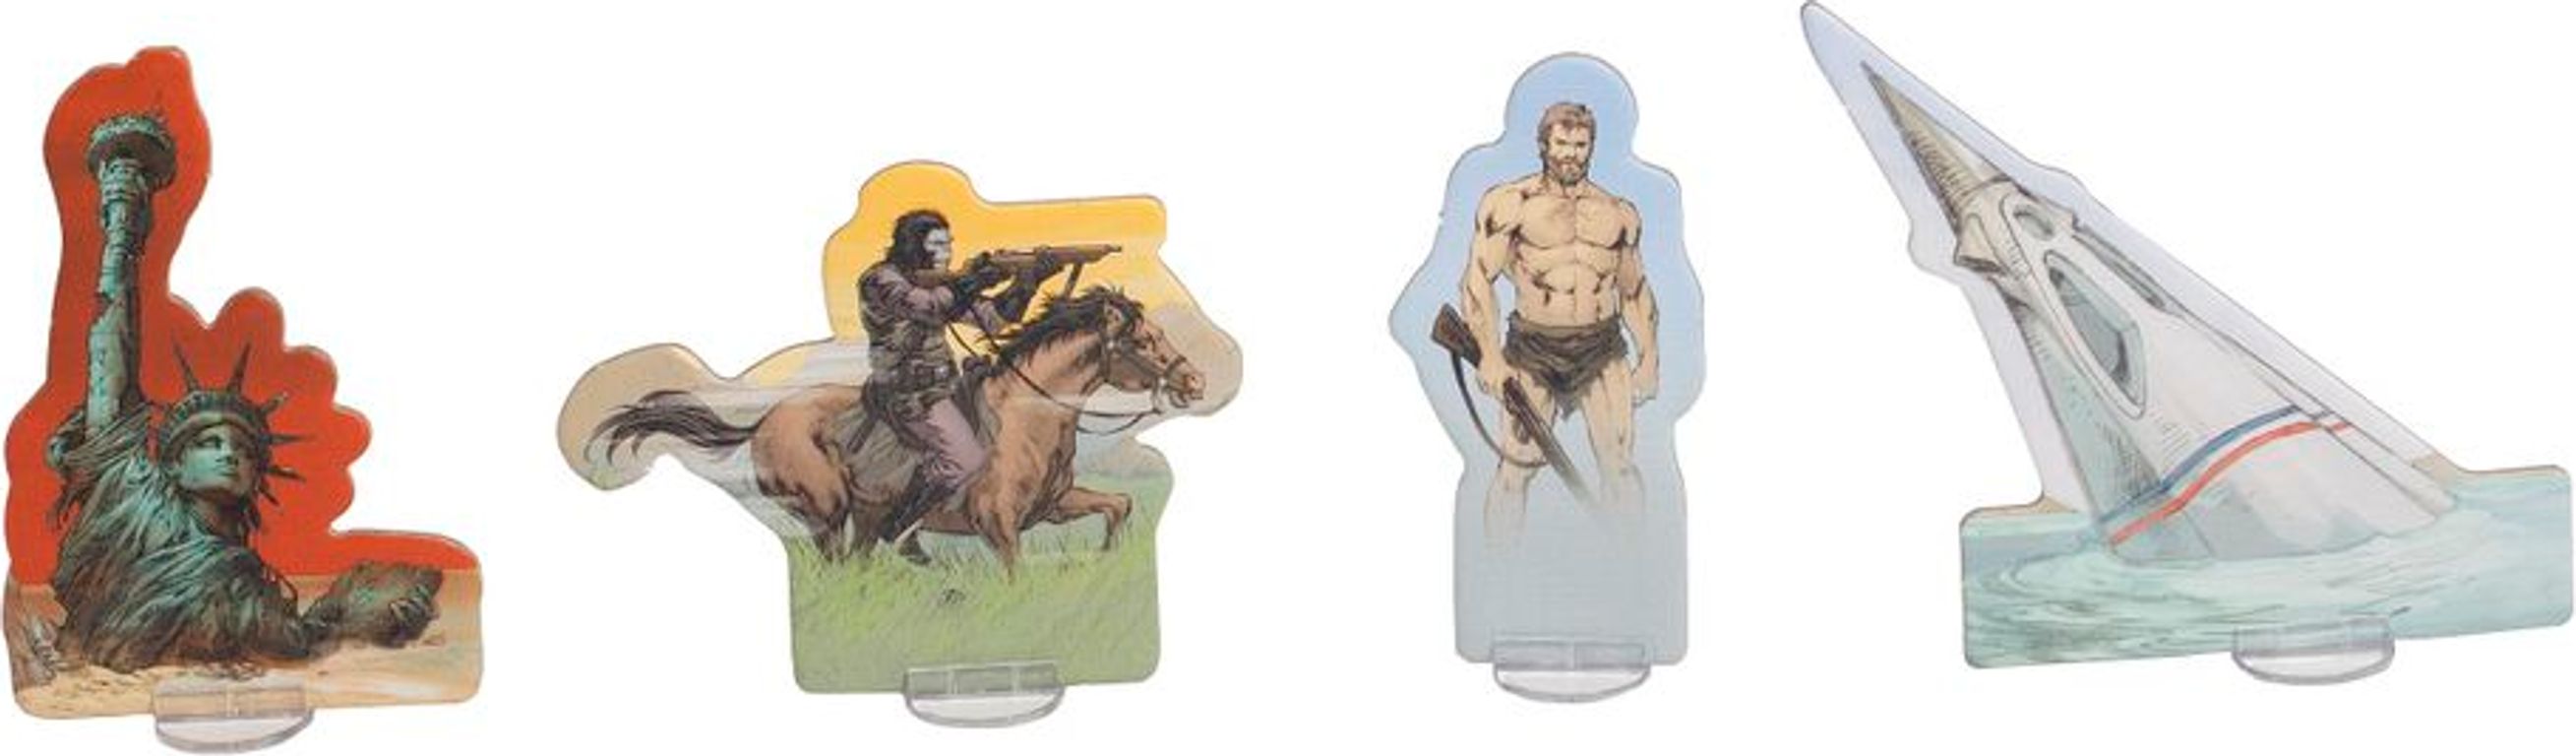 Planet of the Apes components